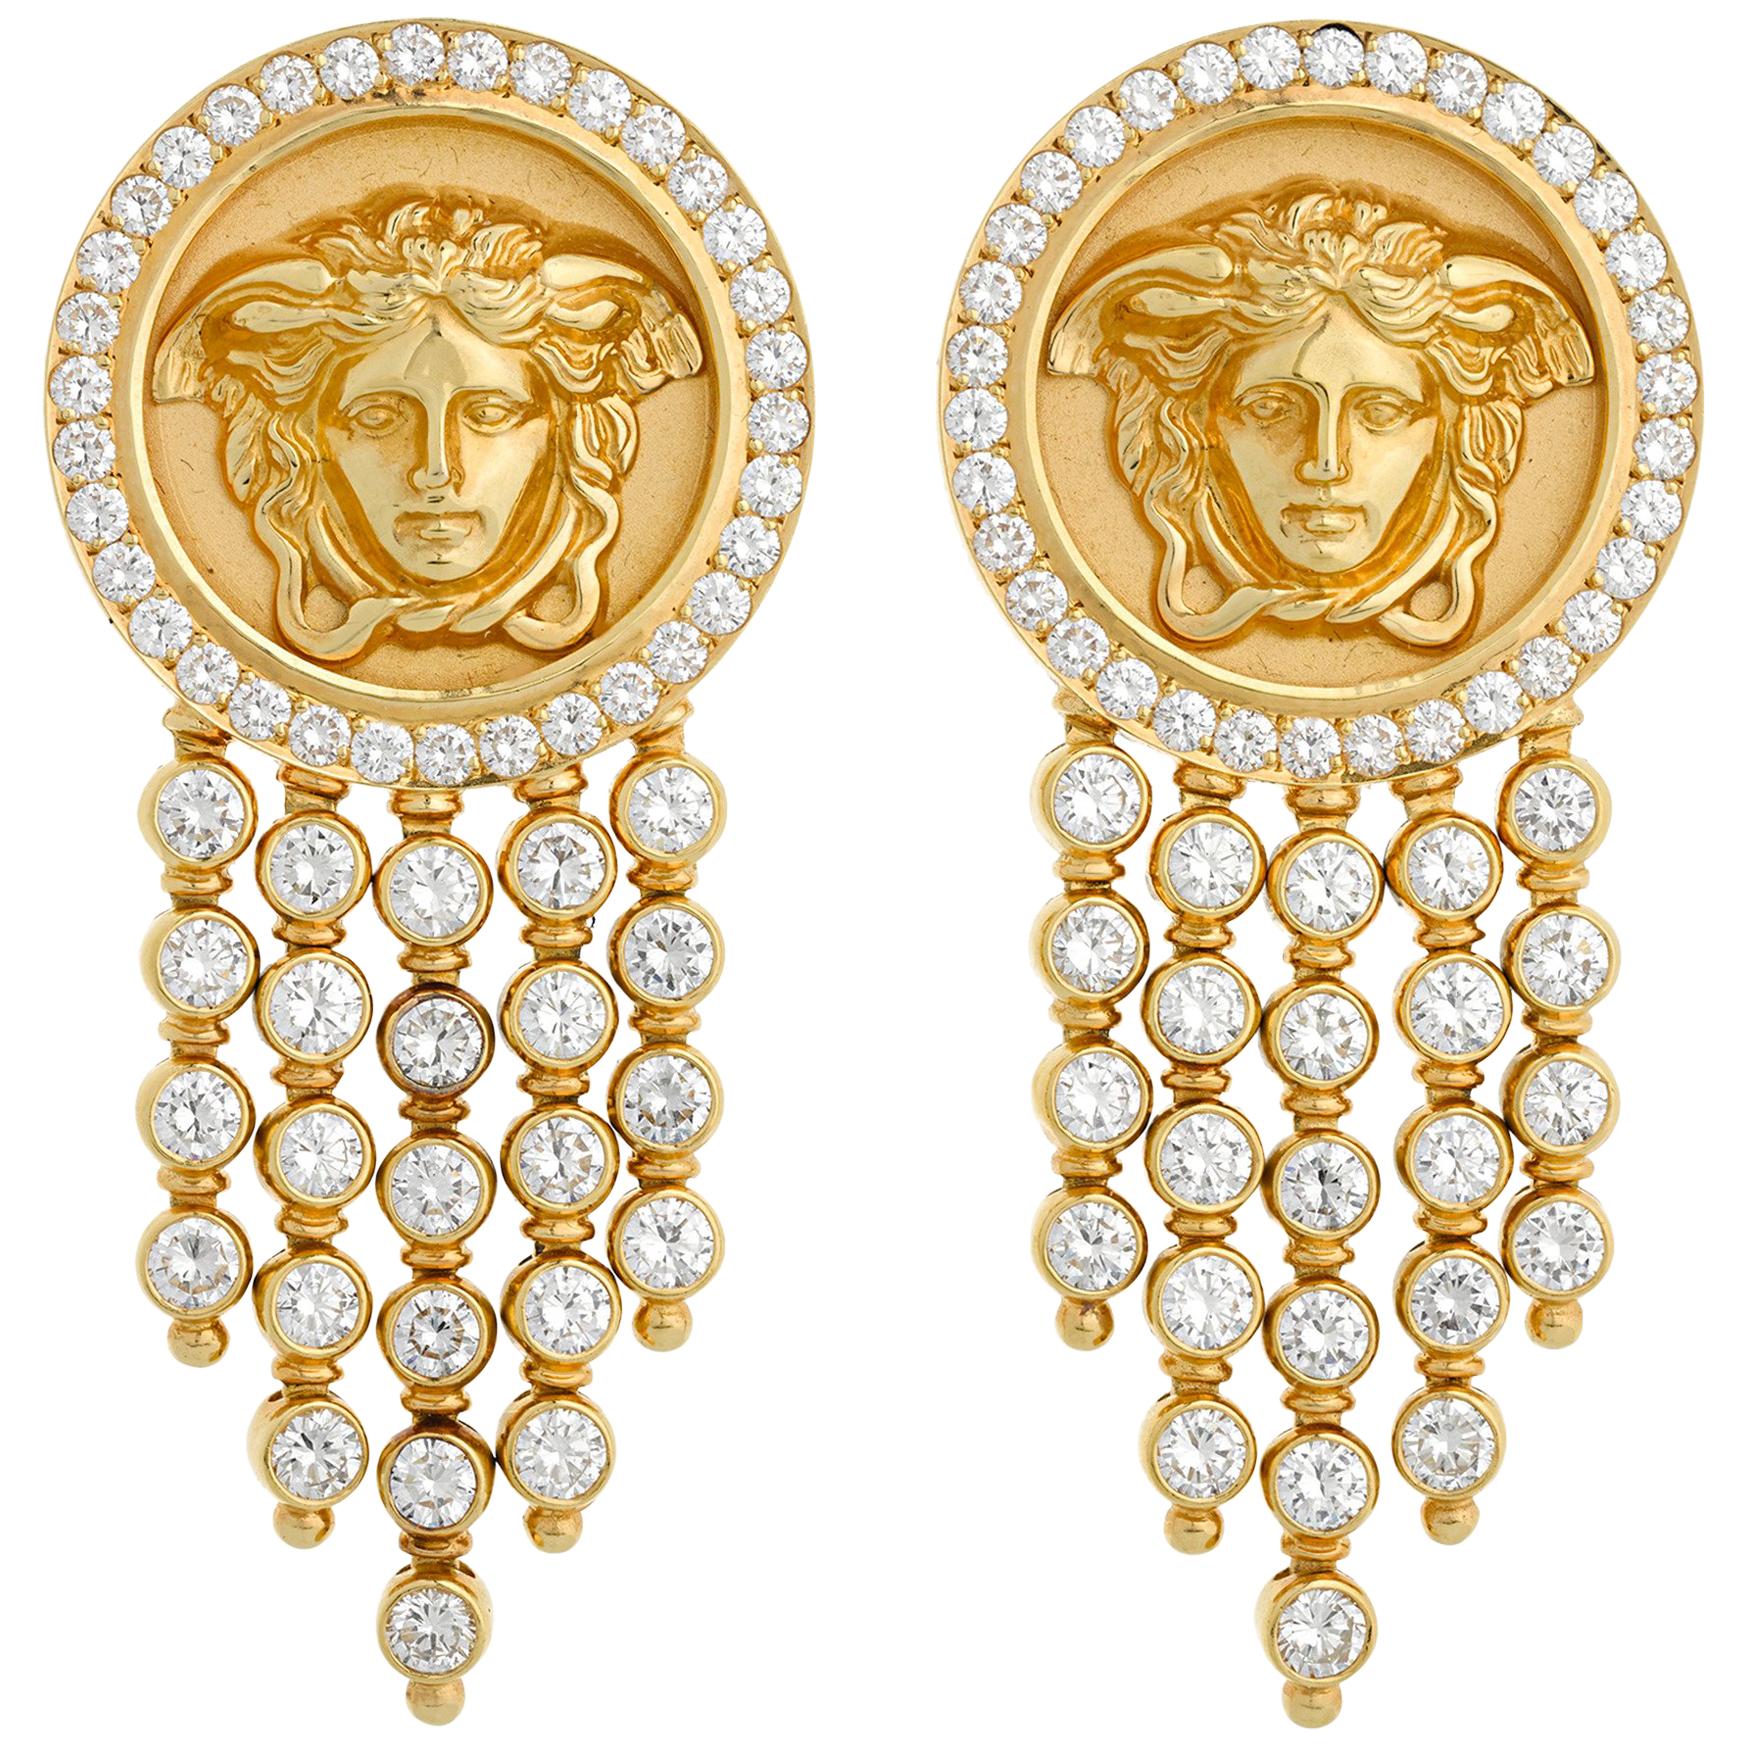 Medusa Gold and Diamond Earrings by Versace